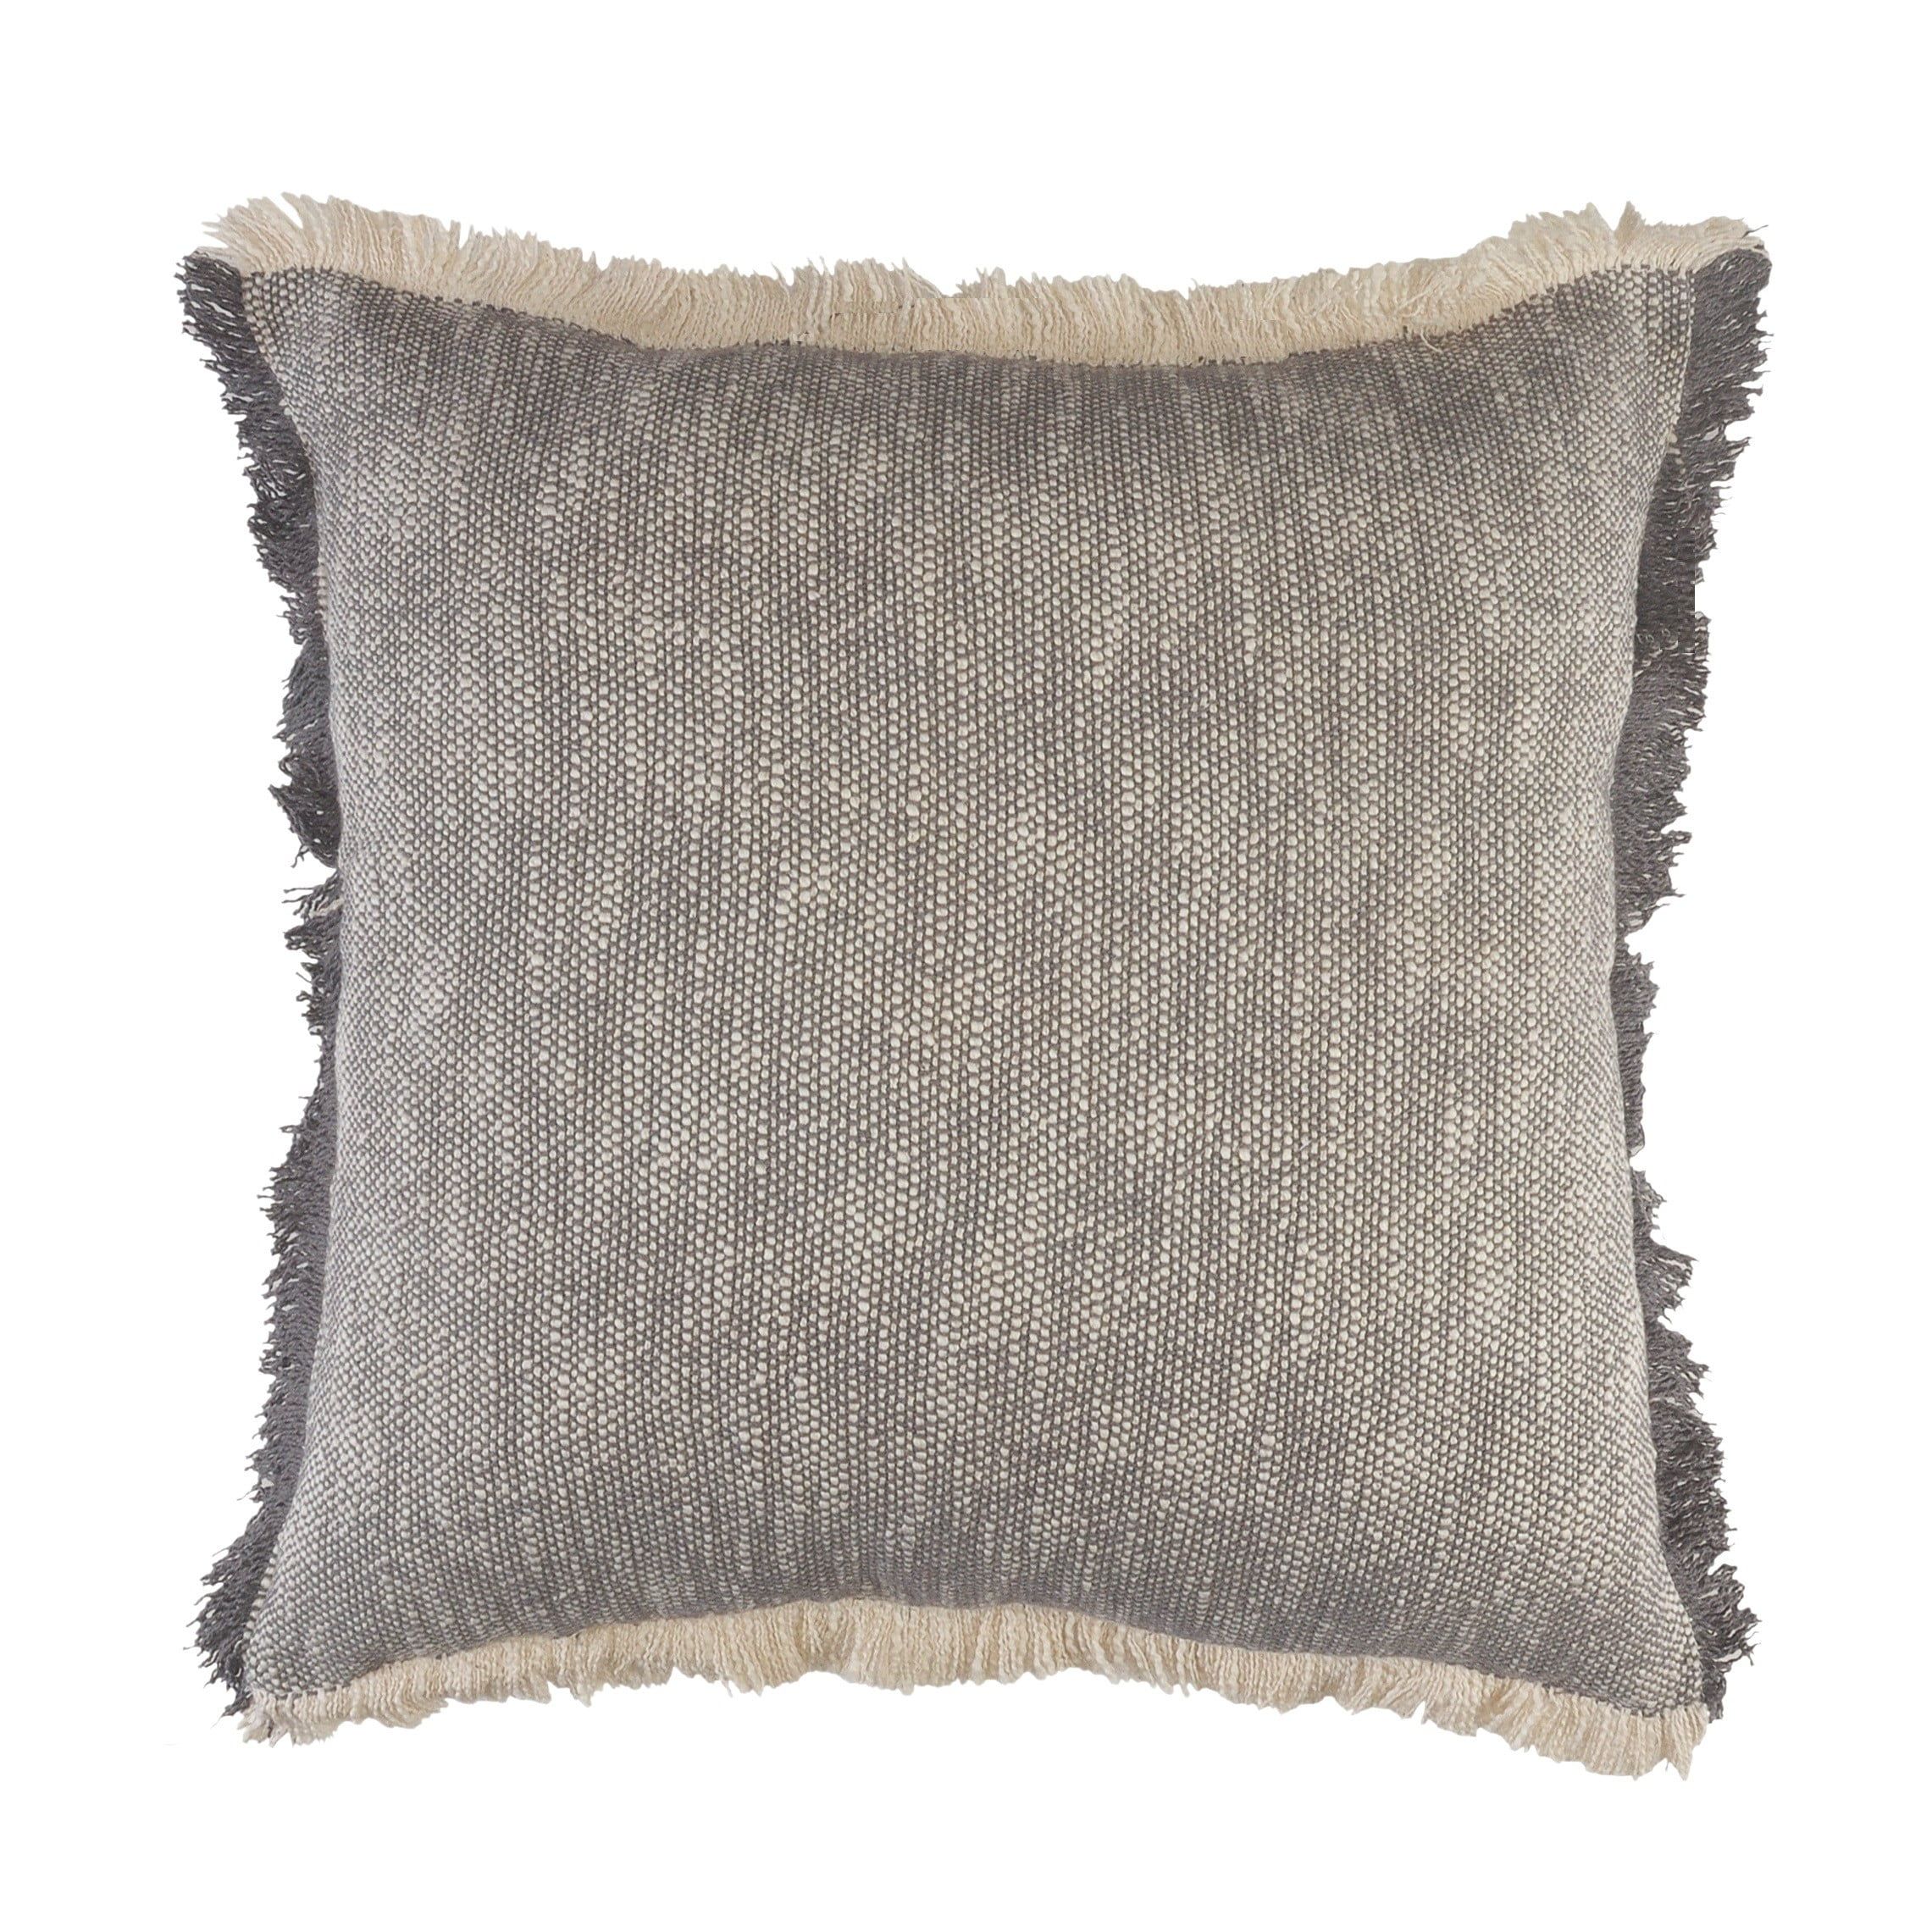 LR Home Neutral Two-Tone Fringe Woven Throw Pillow, 20" Square, Gray / White, Count per Pack 1 | Walmart (US)